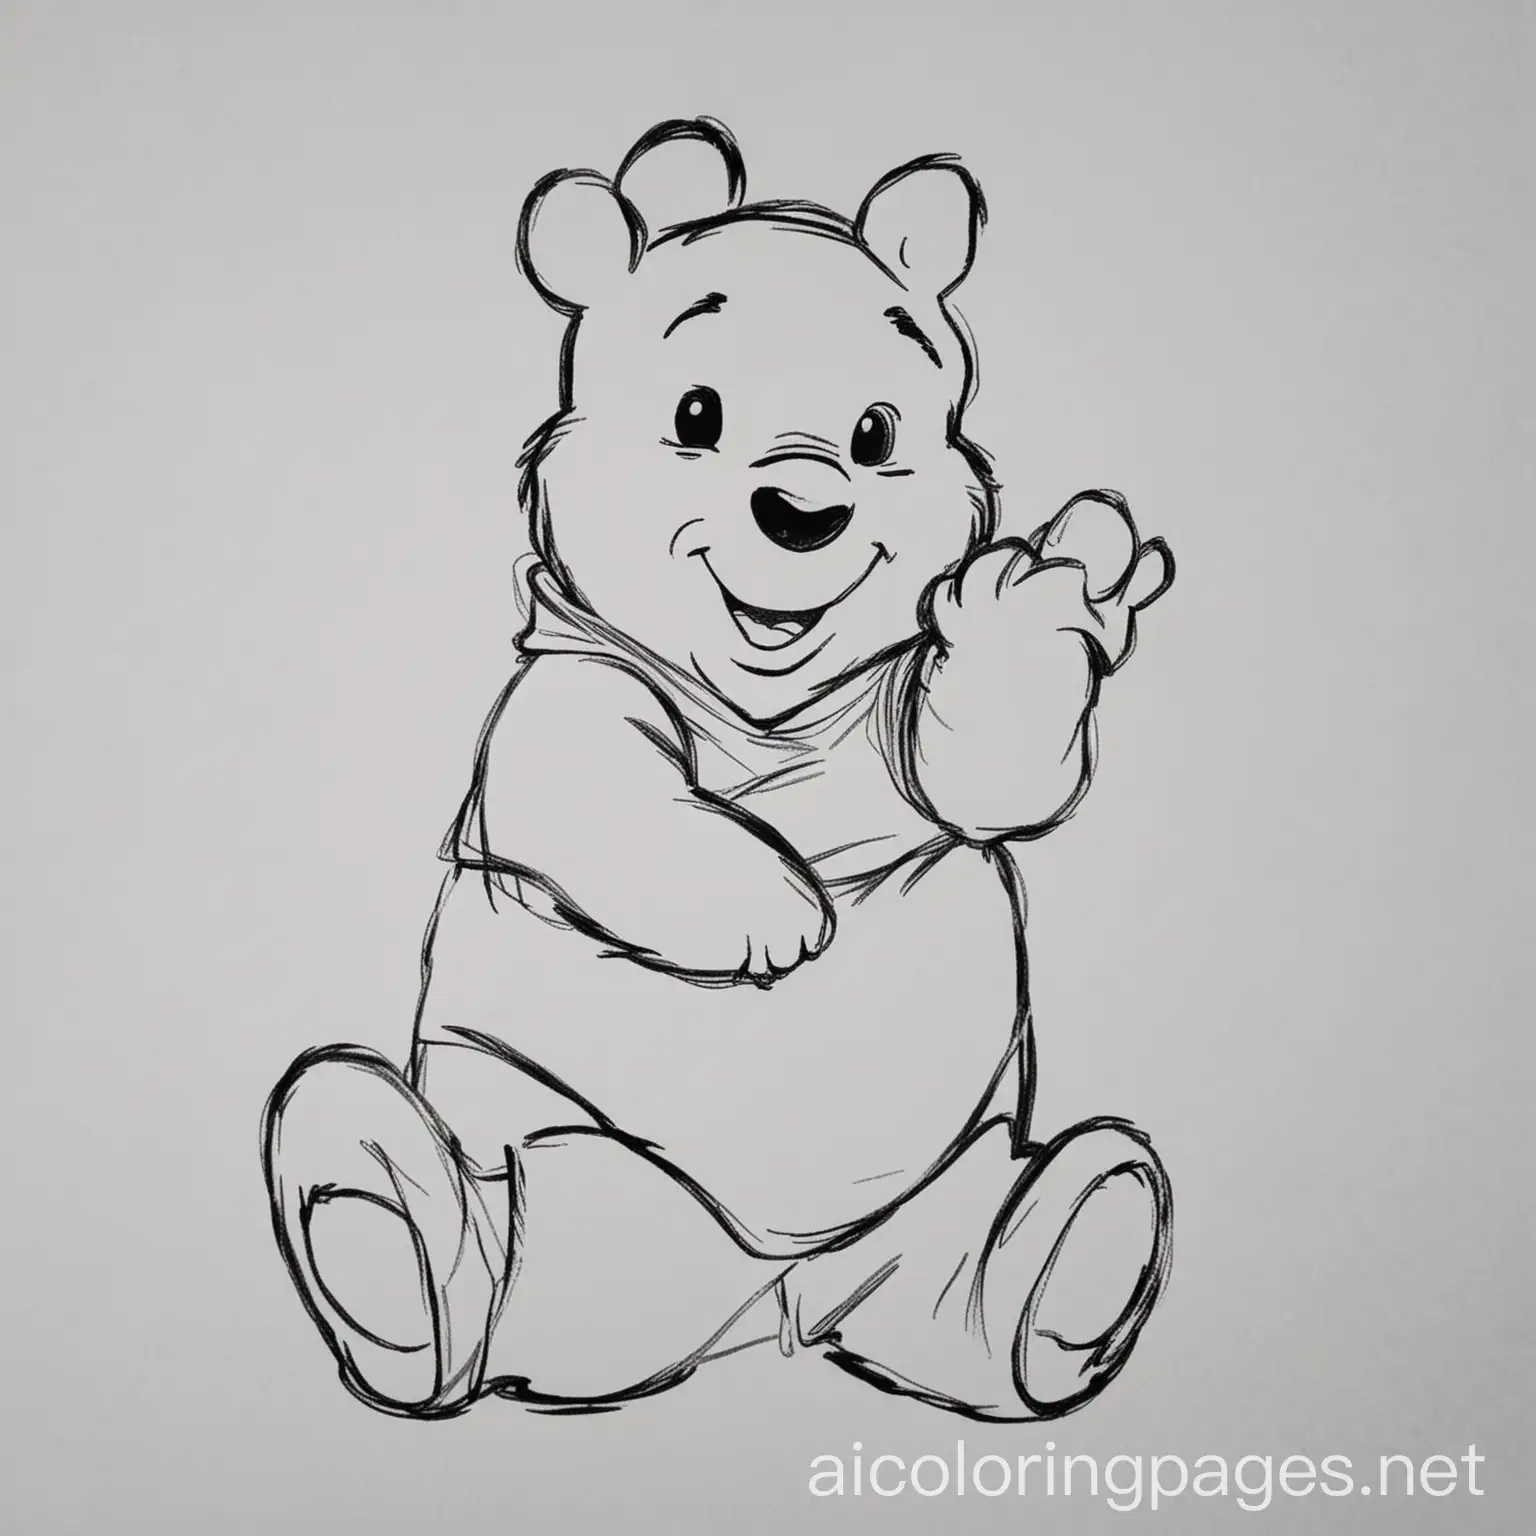 Disney-Winnie-the-Pooh-Coloring-Page-Simple-Line-Art-for-Kids